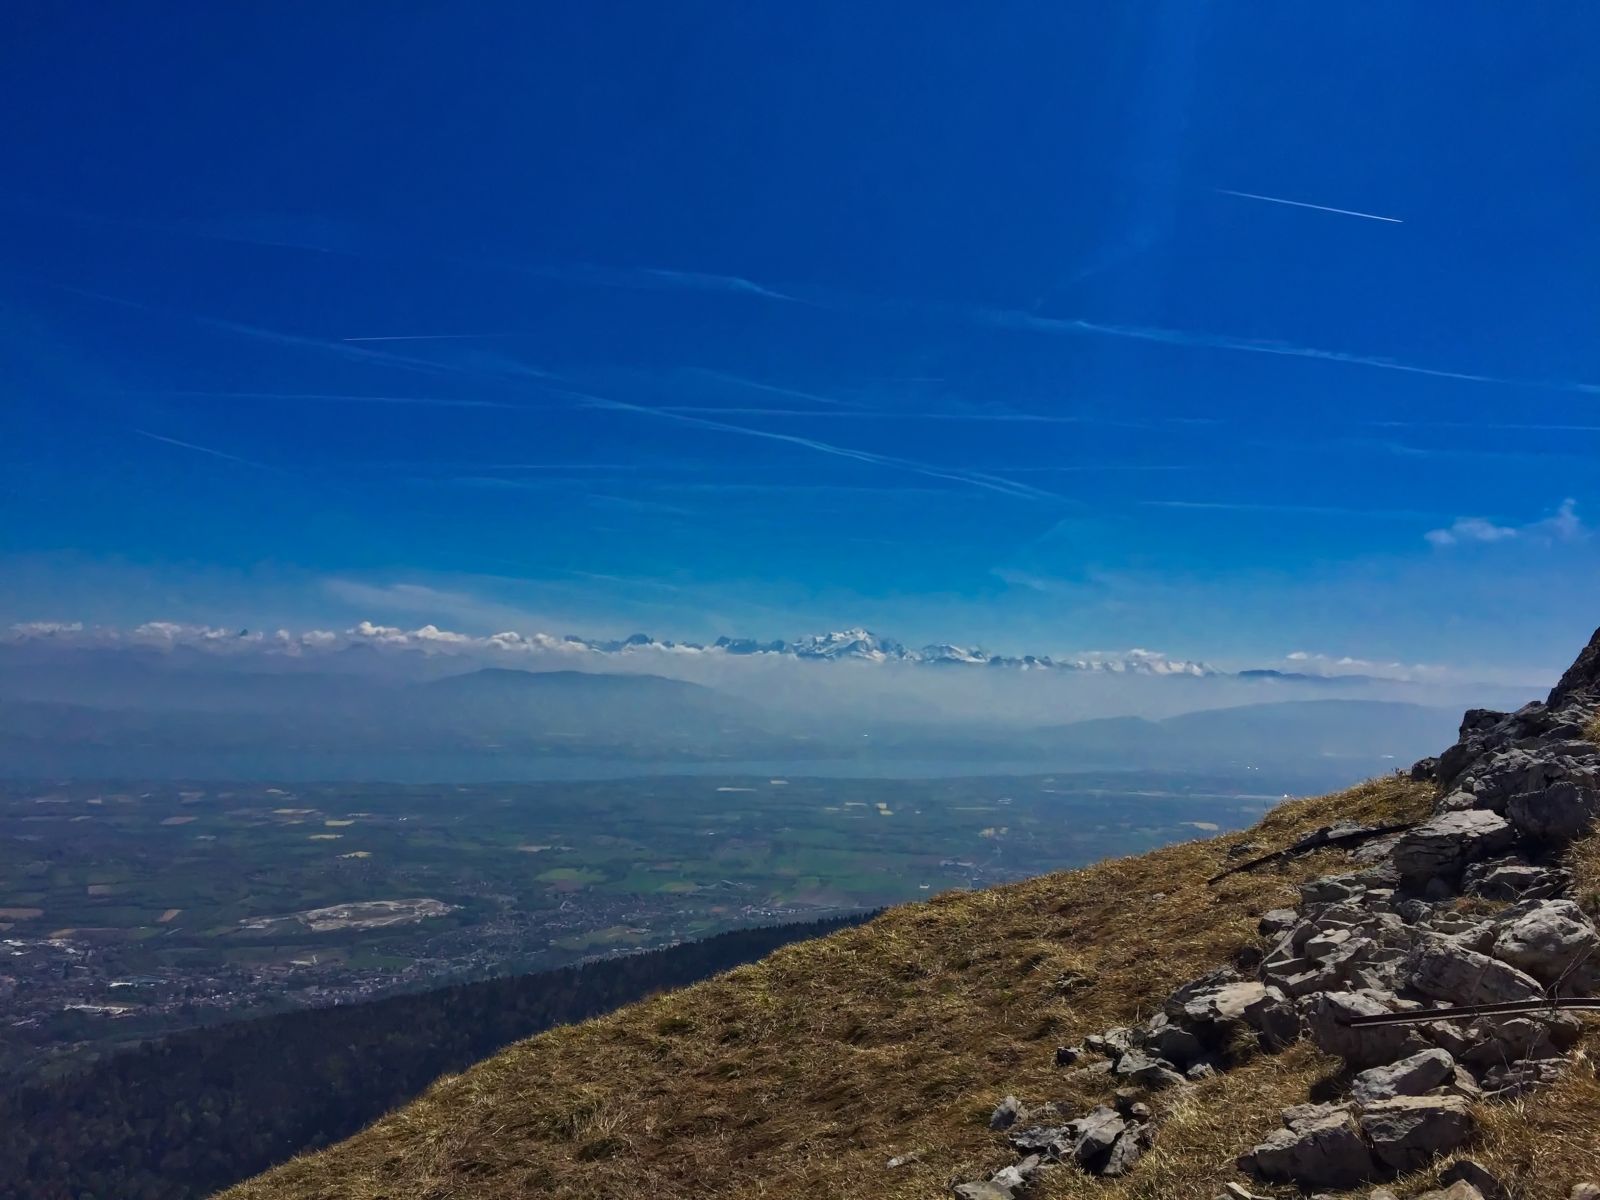 views of the Montblanc and Geneva region from Montrond